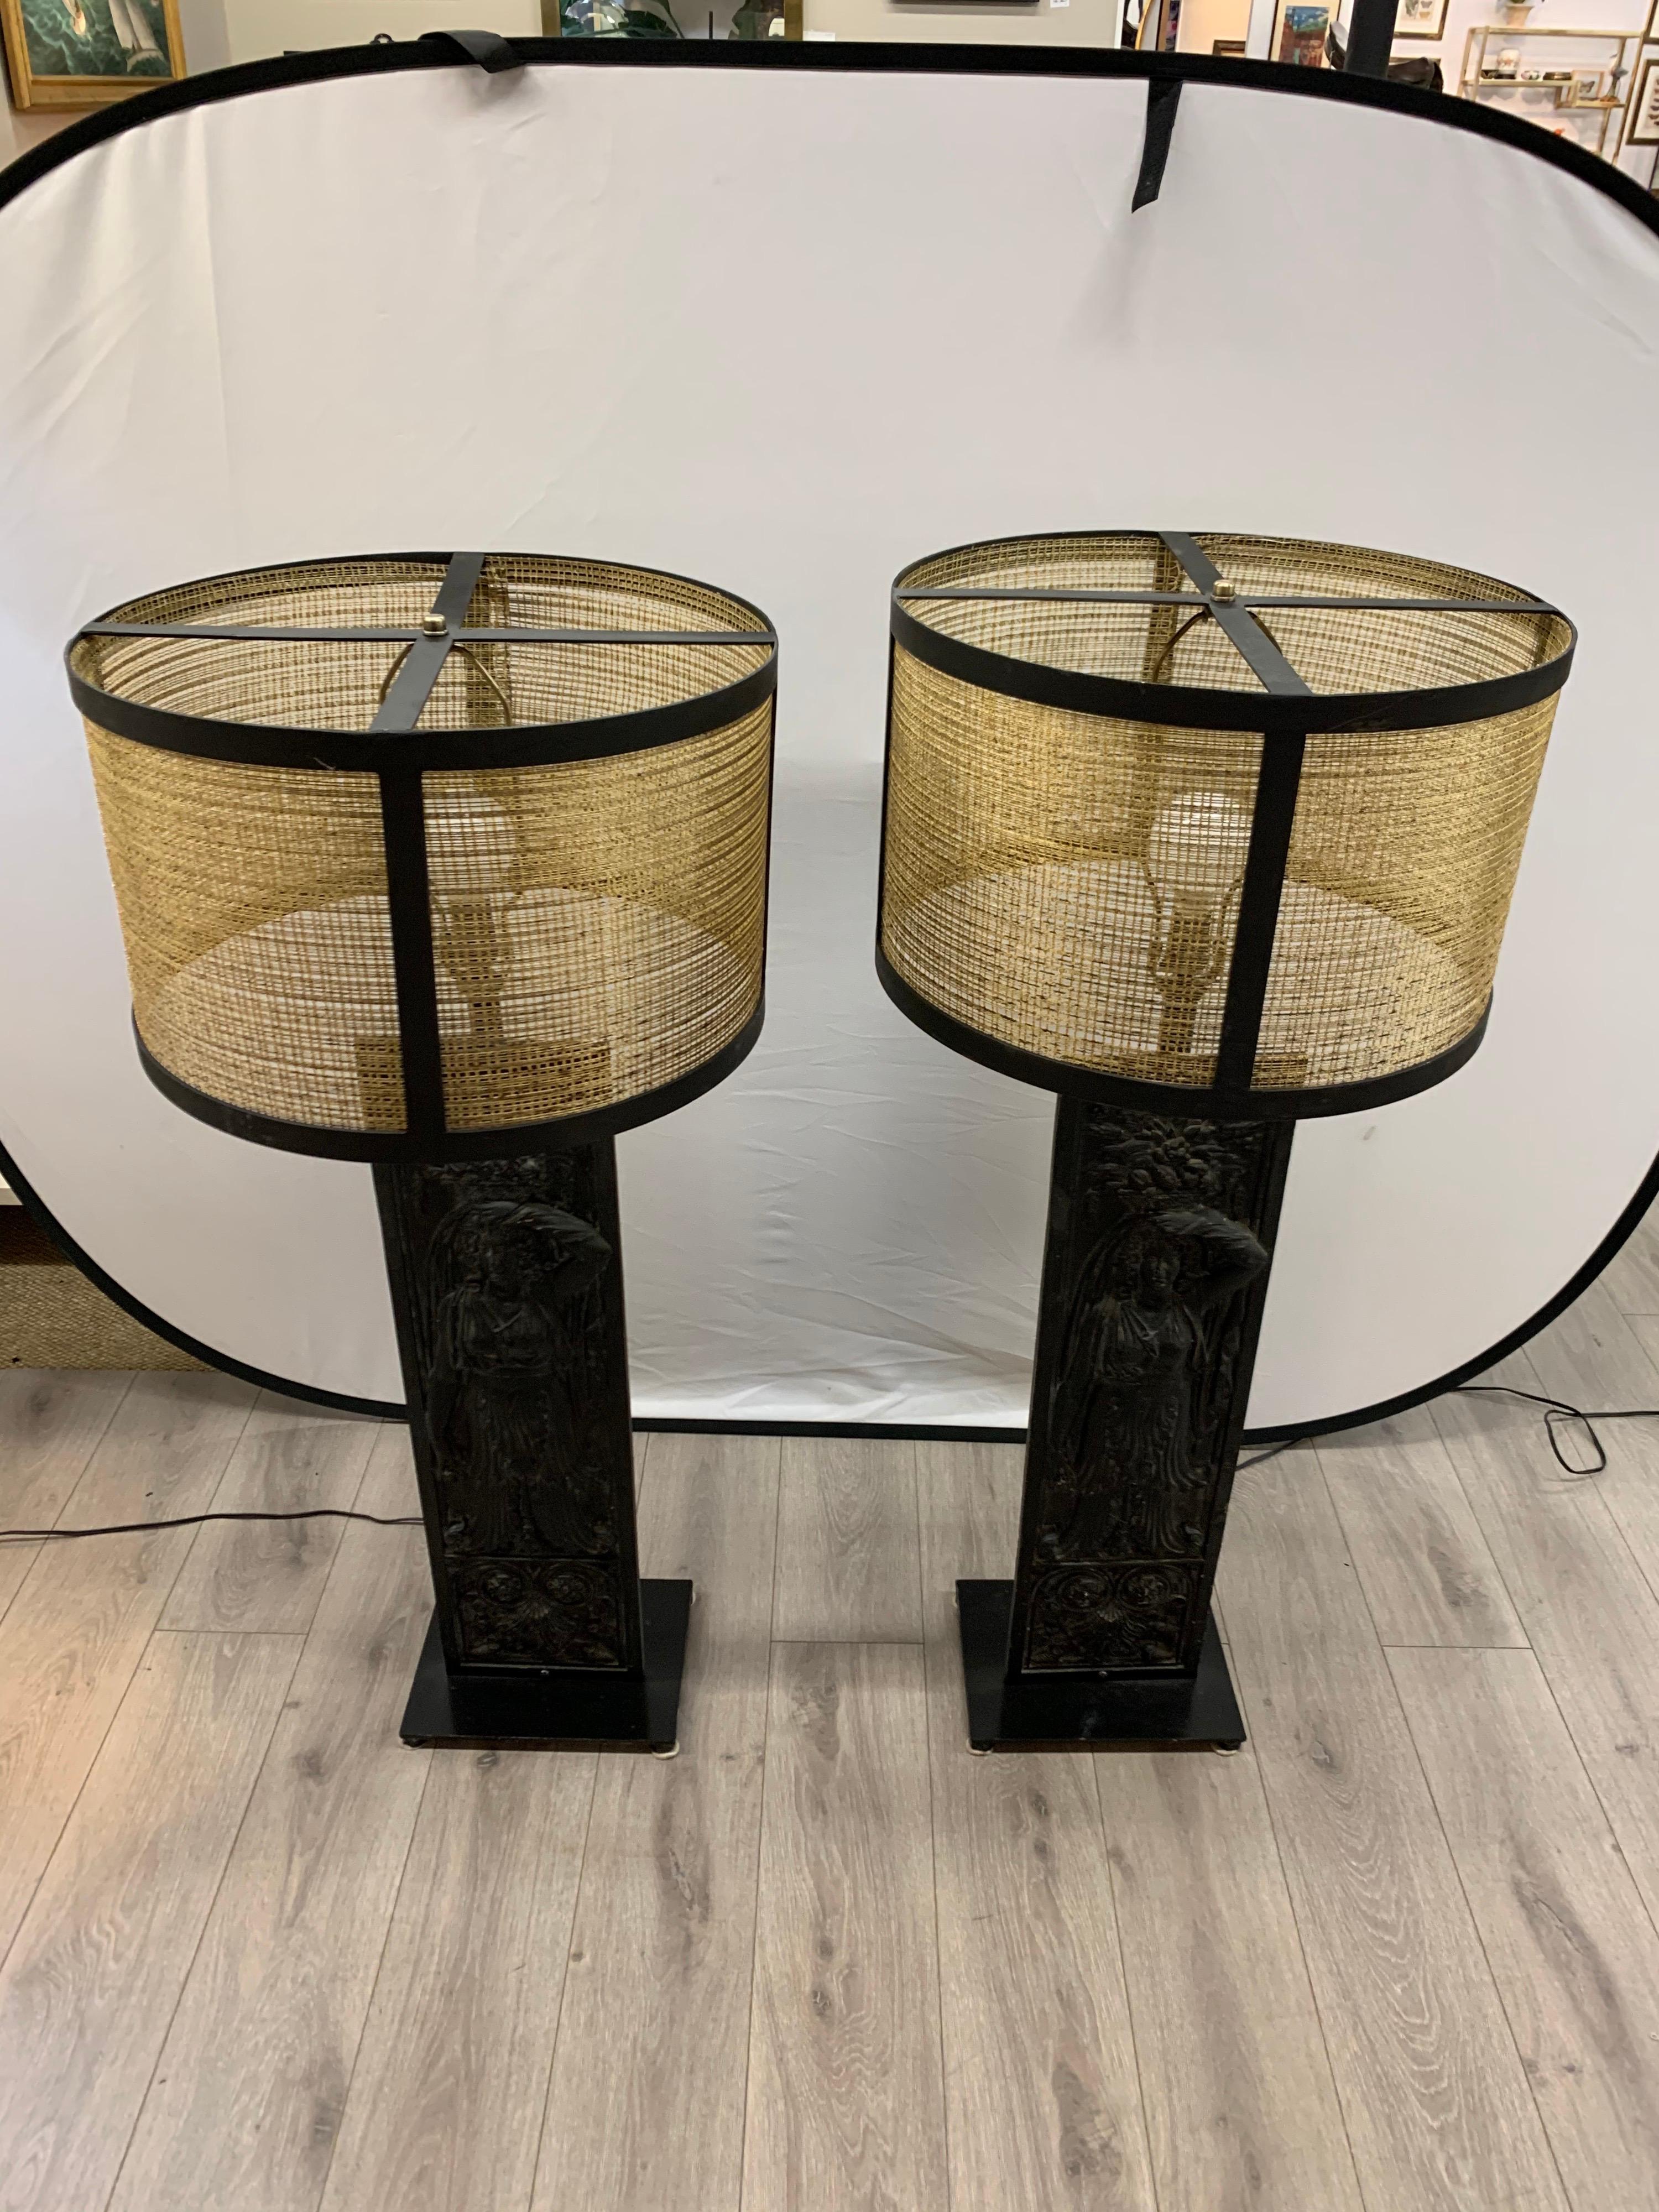 Rare pair of antique wrought iron panels that have been converted into matching table lamps. The detail on the wrought iron is magnificent. Wire for USA and in perfect working order. Now, more than ever, home is where the heart is.